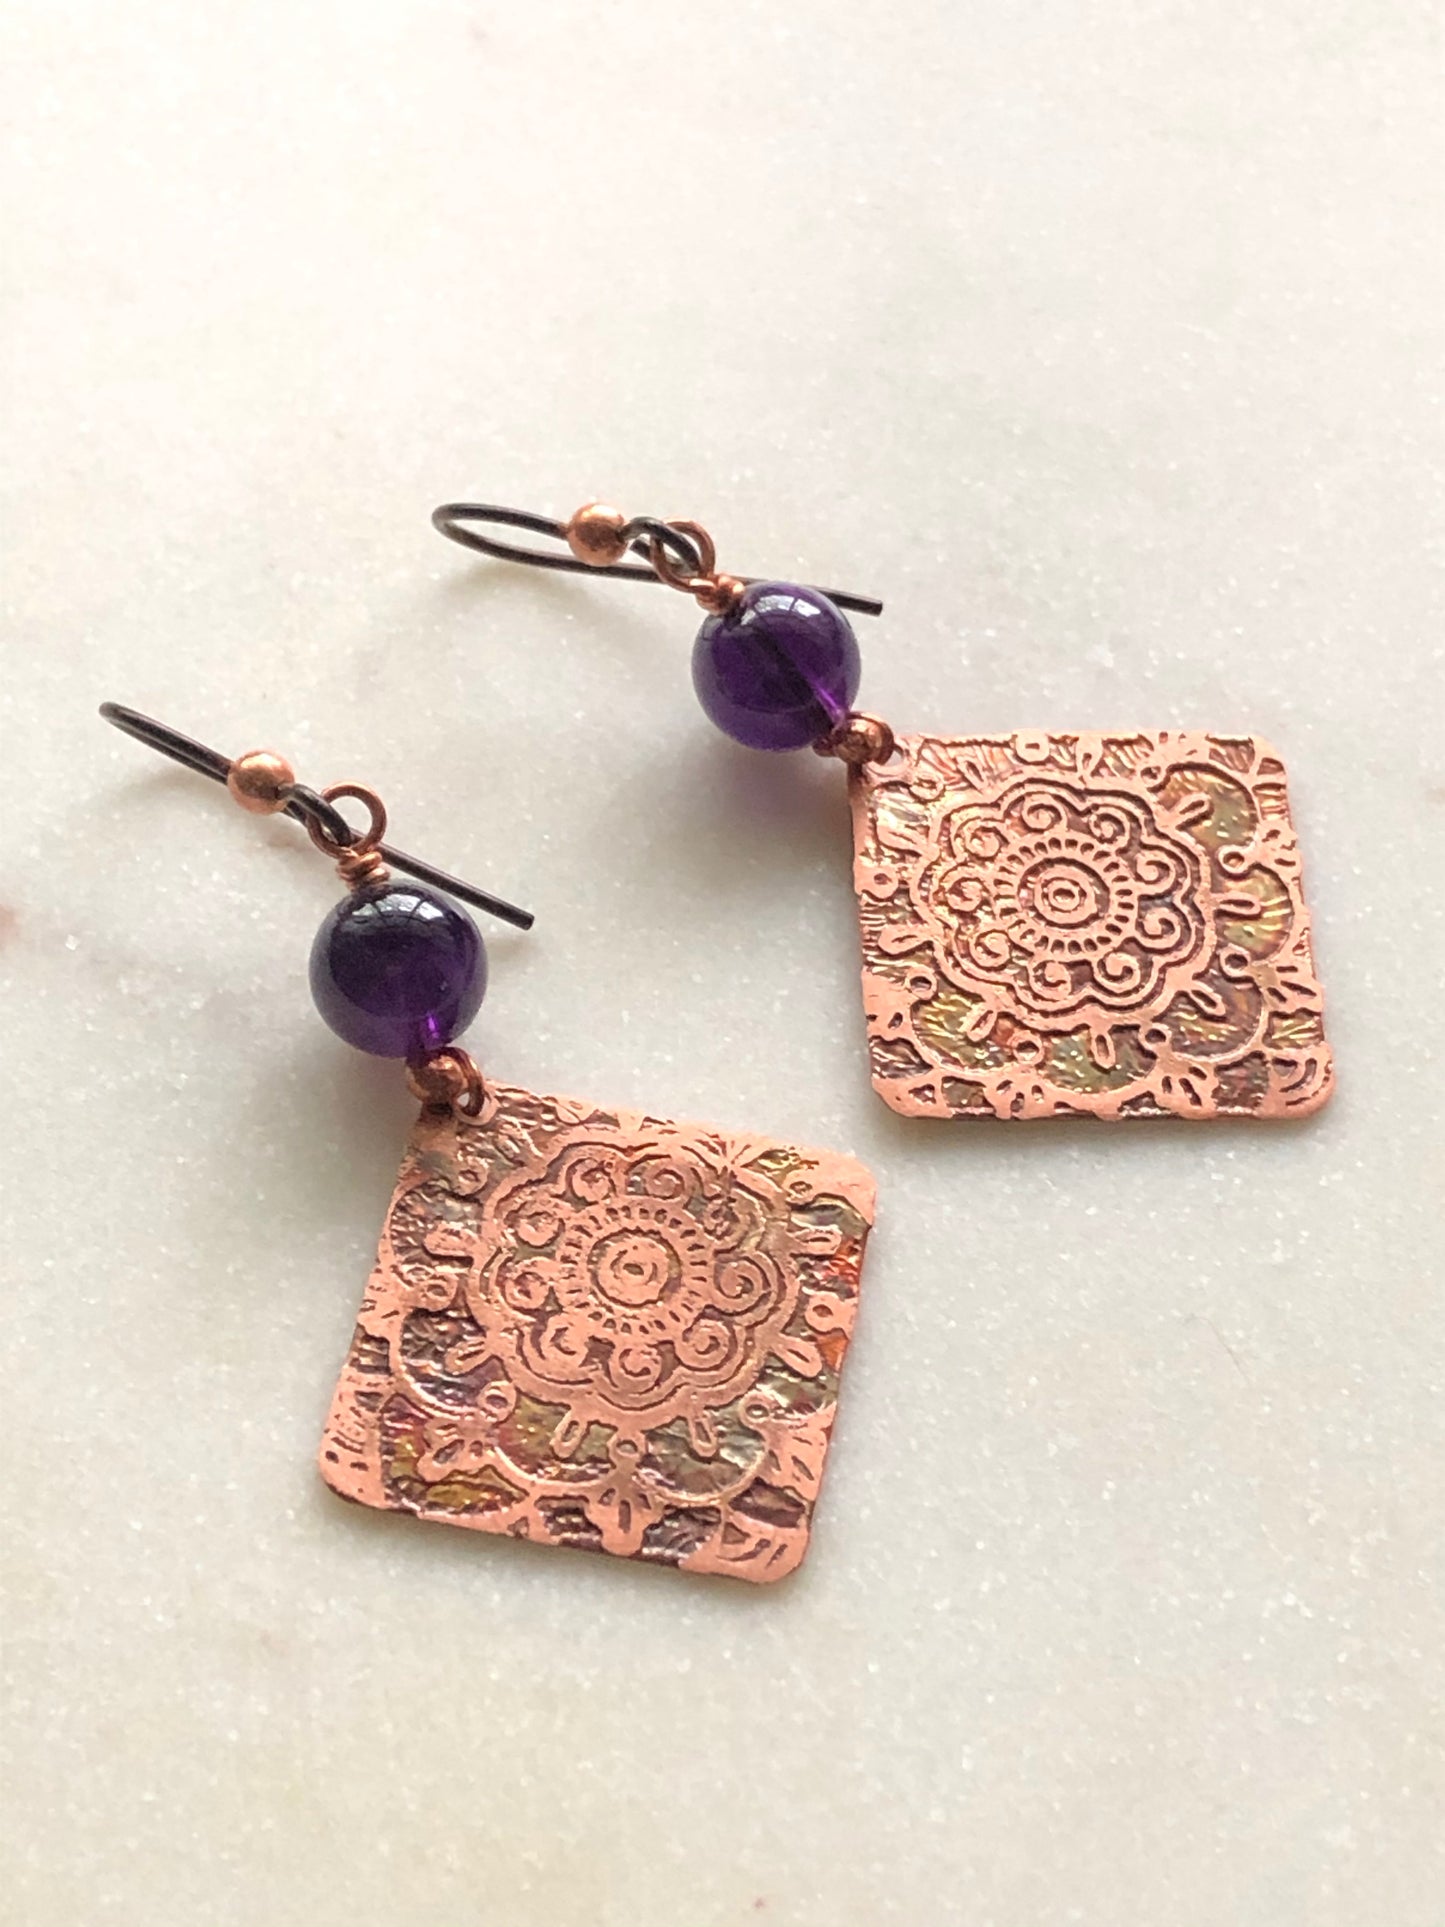 Acid etched copper earrings with amethyst